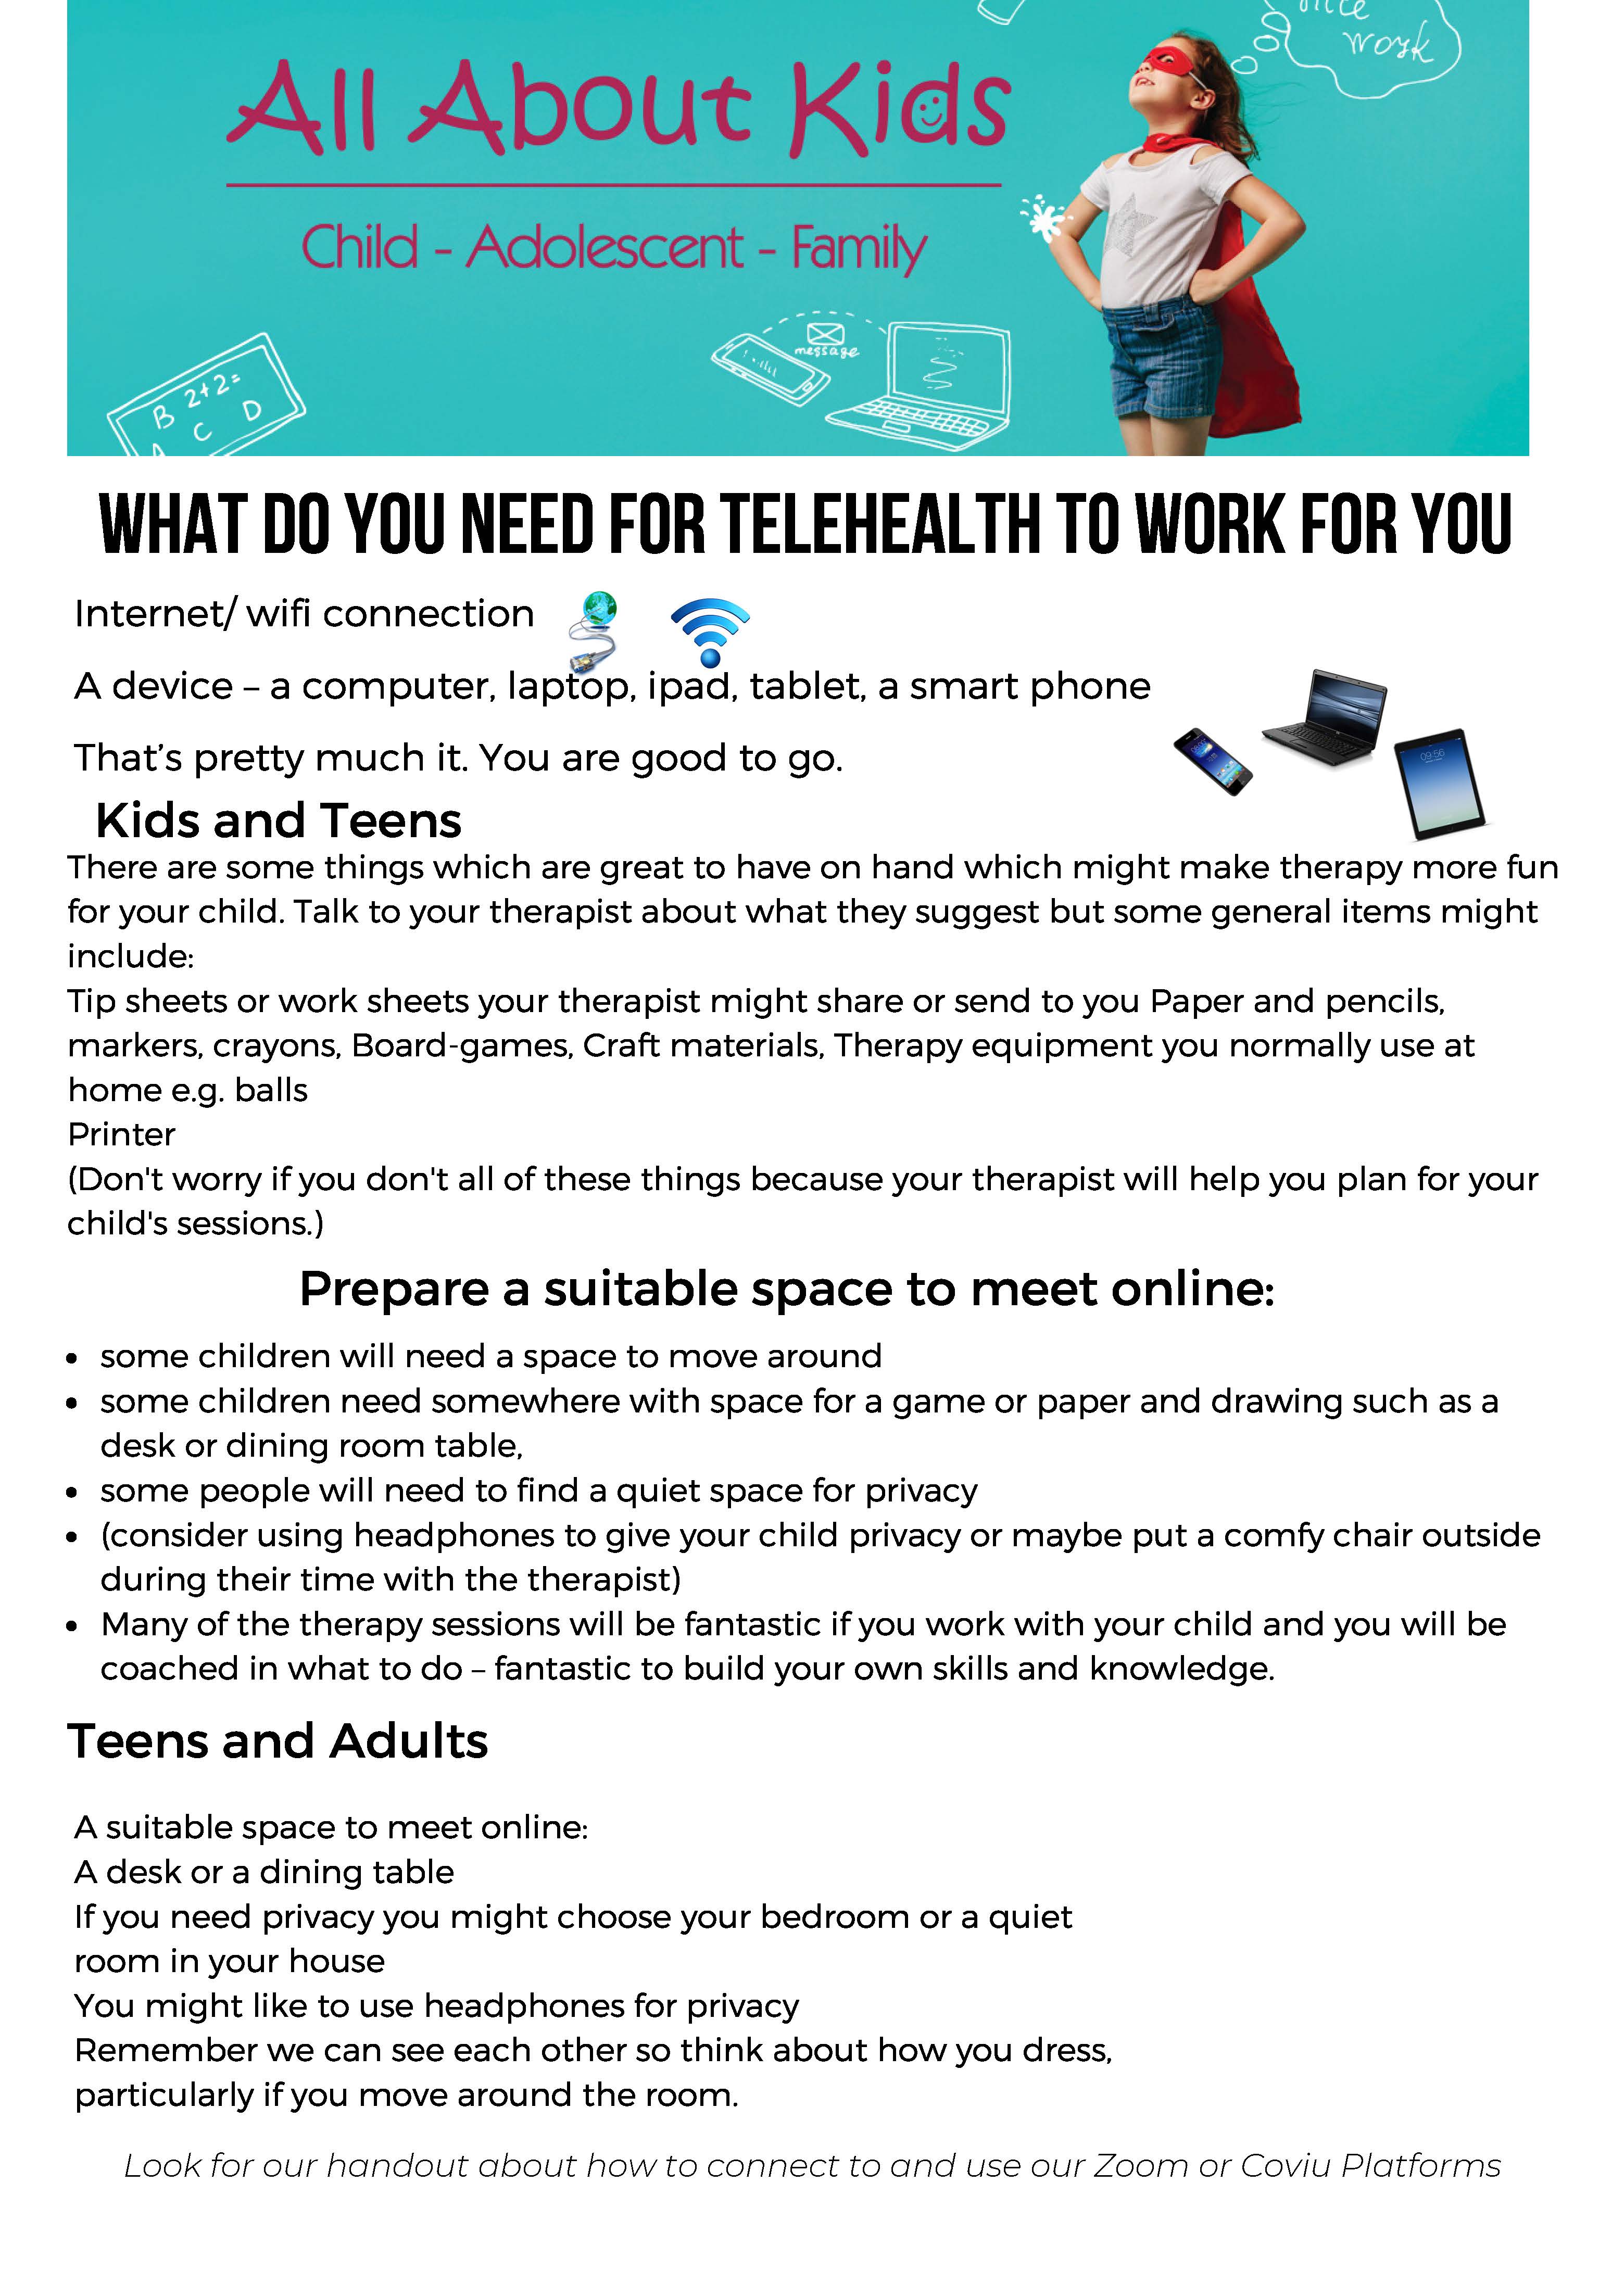 Tips for Telehealth at home